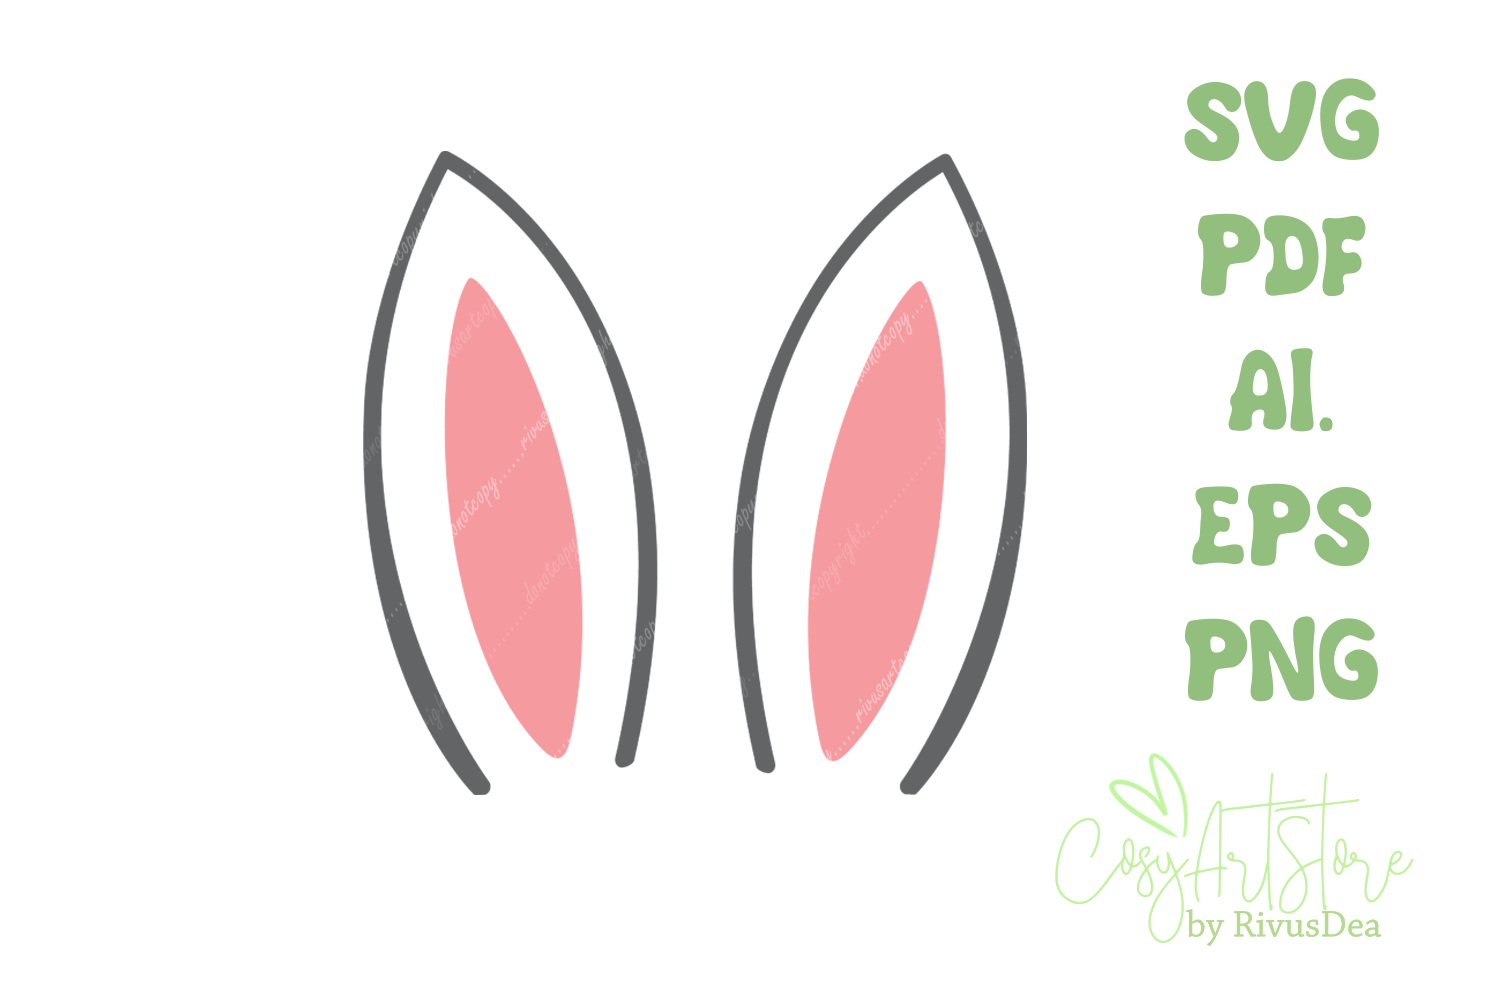 Bunny ears SVG download. Bunny ears PNG clipart. By Rivus Art